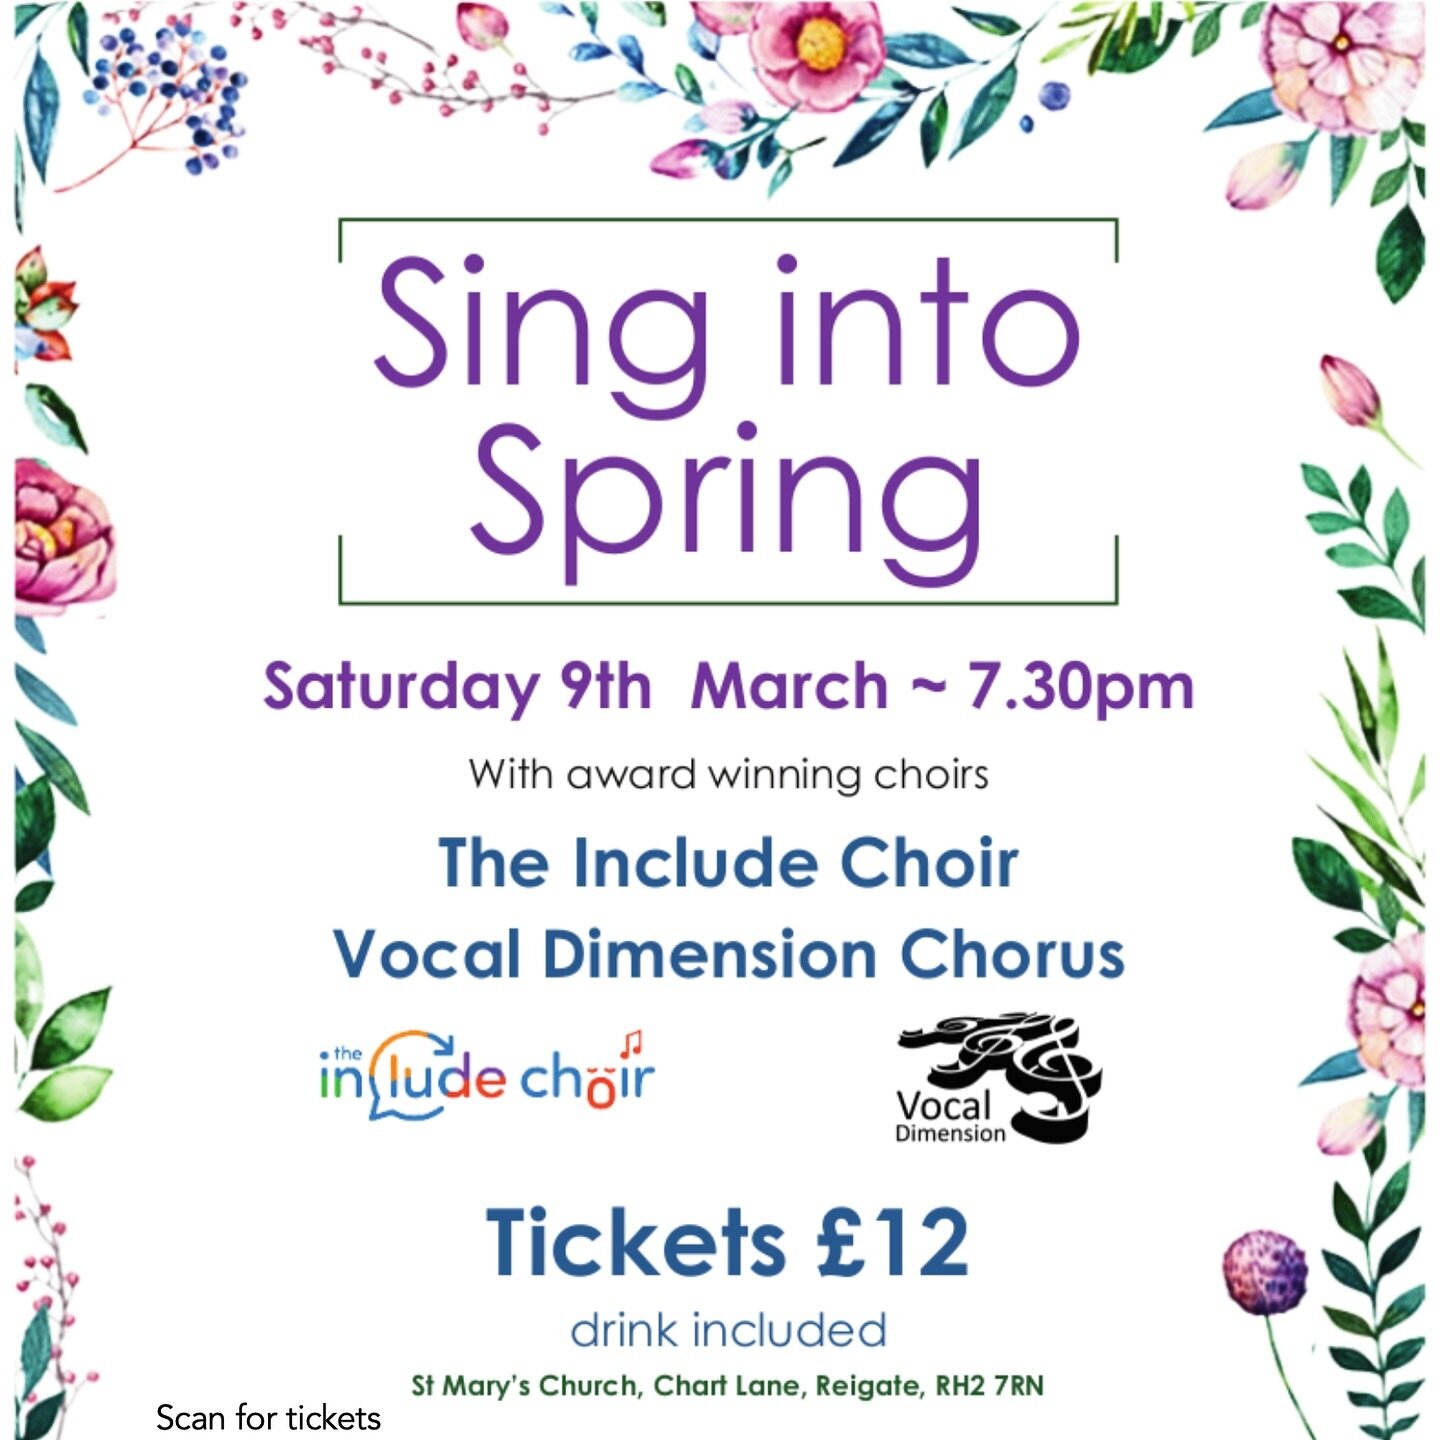 🎶 Sing into Spring 🎵
Redhill Redstone Rotary are holding a Spring Choir Concert on Saturday 9th March with proceeds to The Include Choir and Vocal Dimensions. Tickets are just &pound;12, drink included.  #Reigate #RedhillRedstoneRotary #IncludeChoi